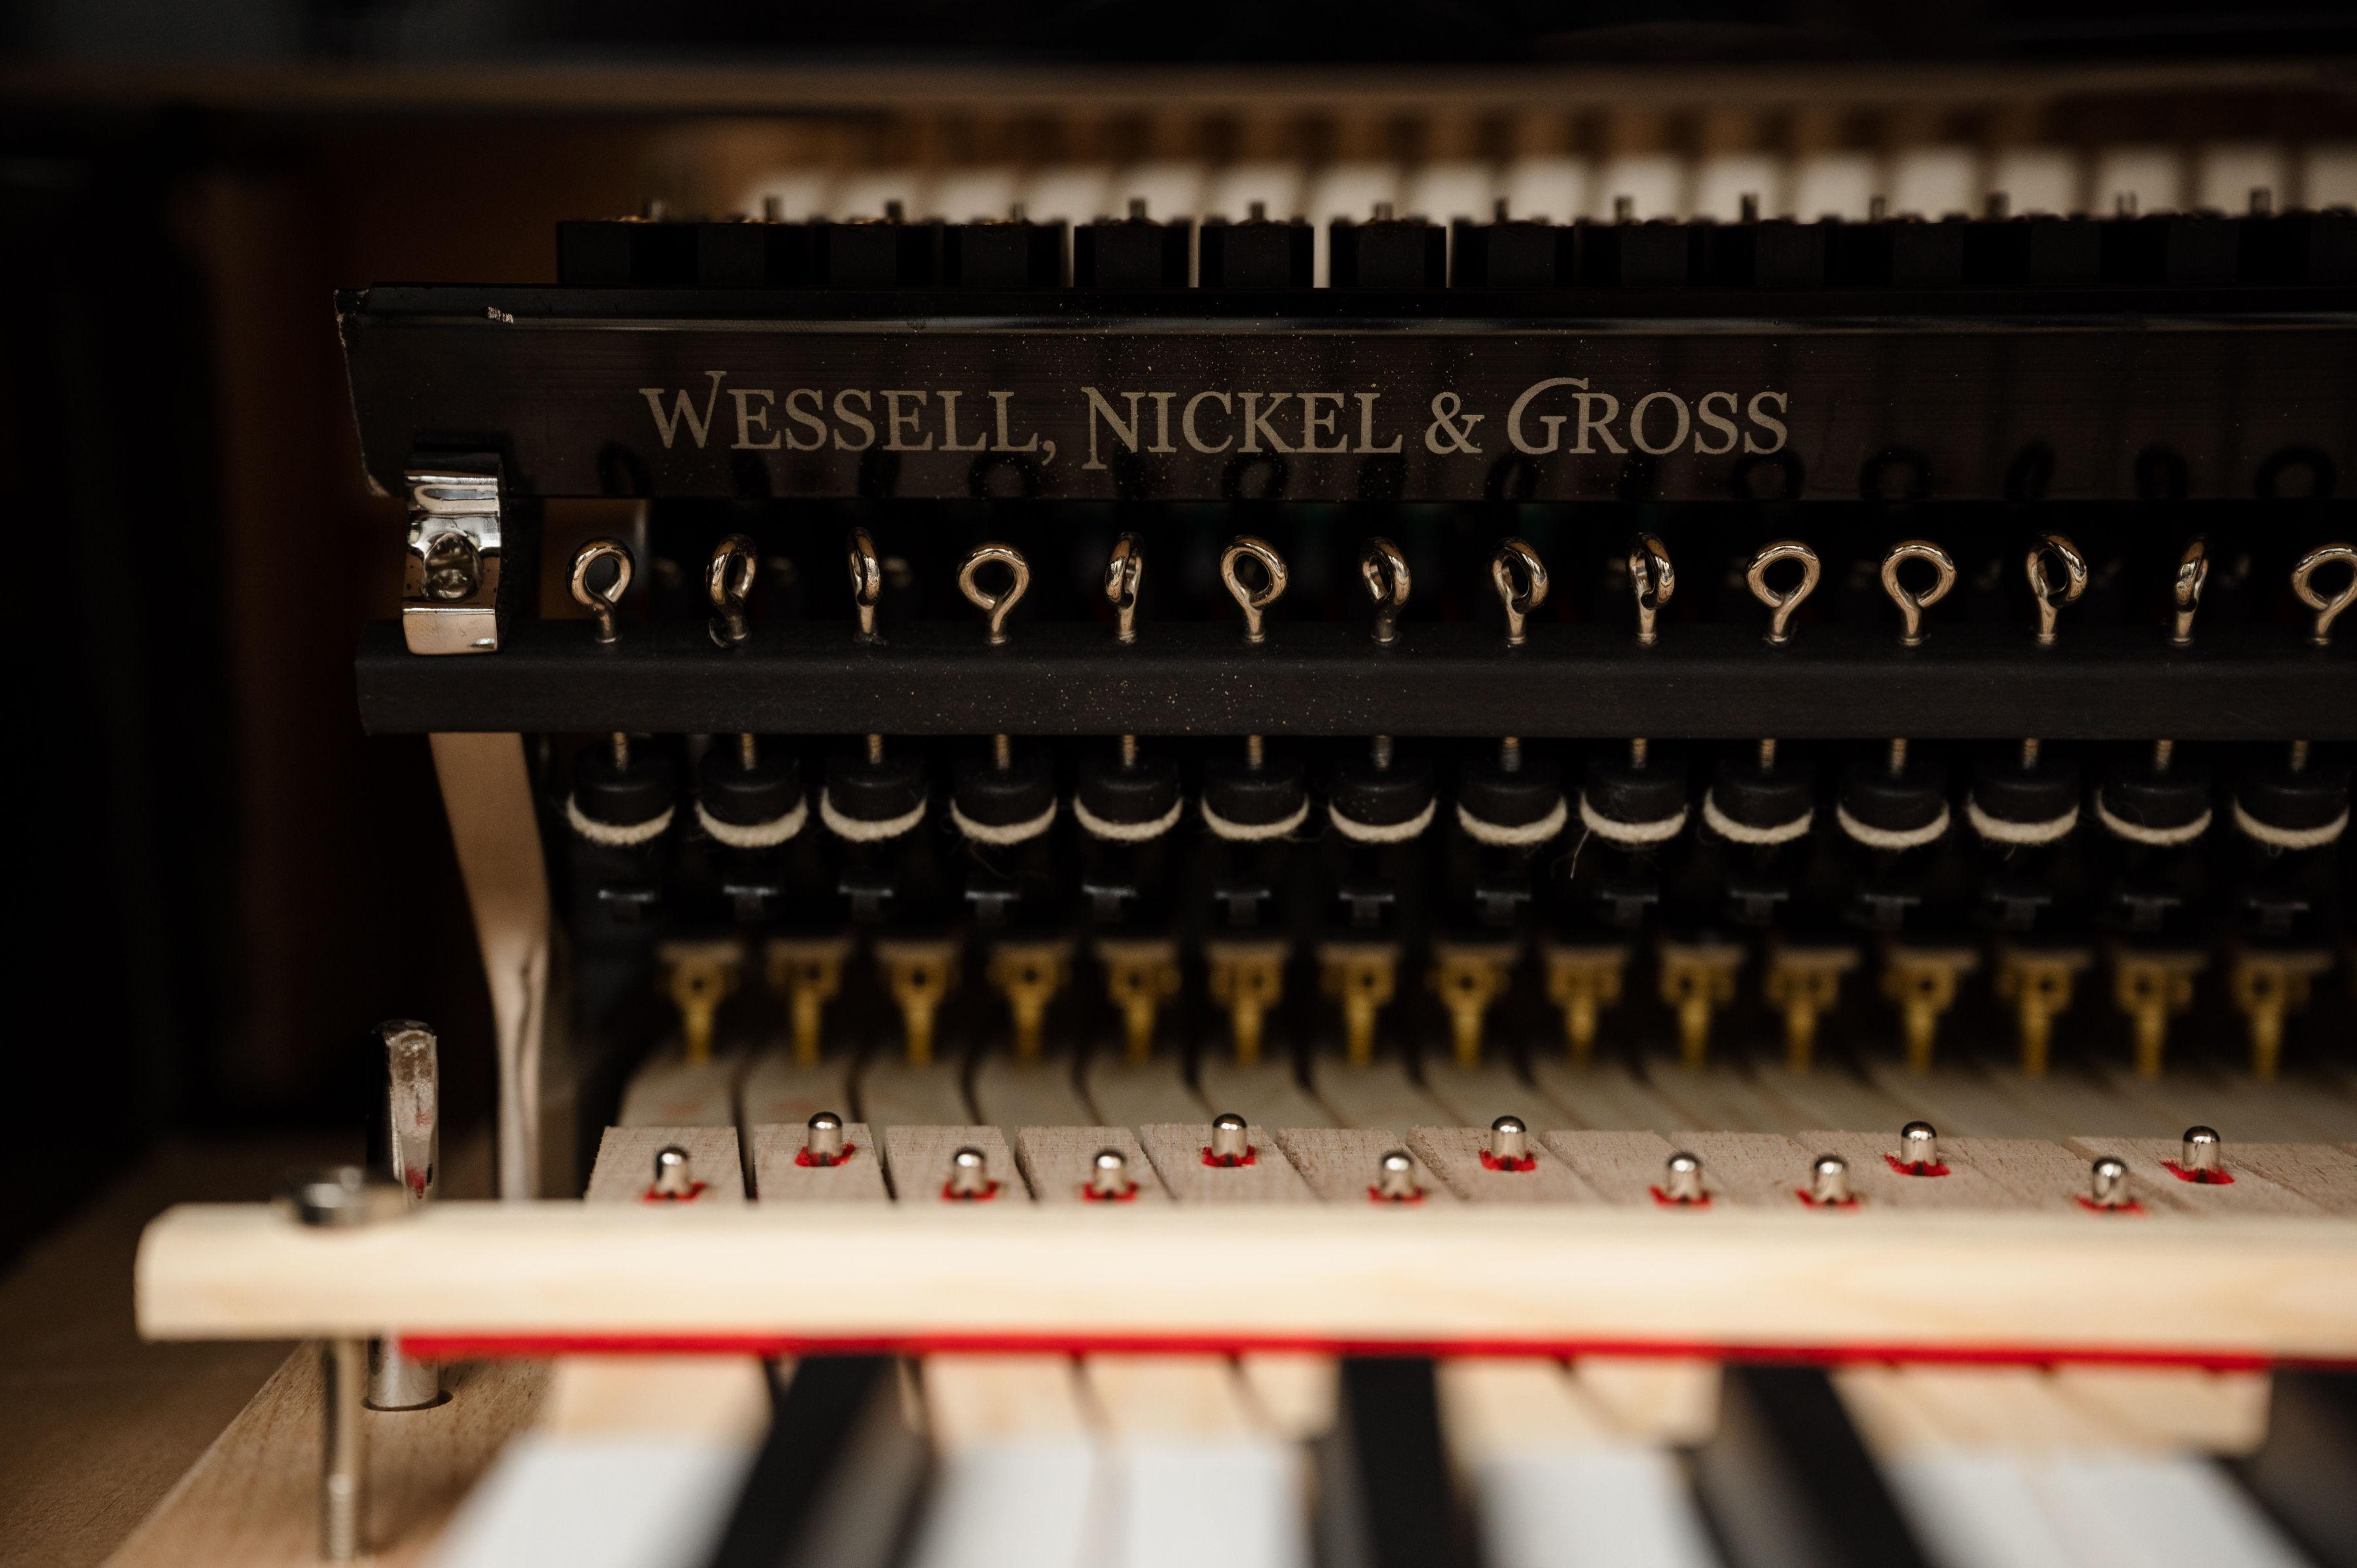 Wessell, Nickel & Gross Action